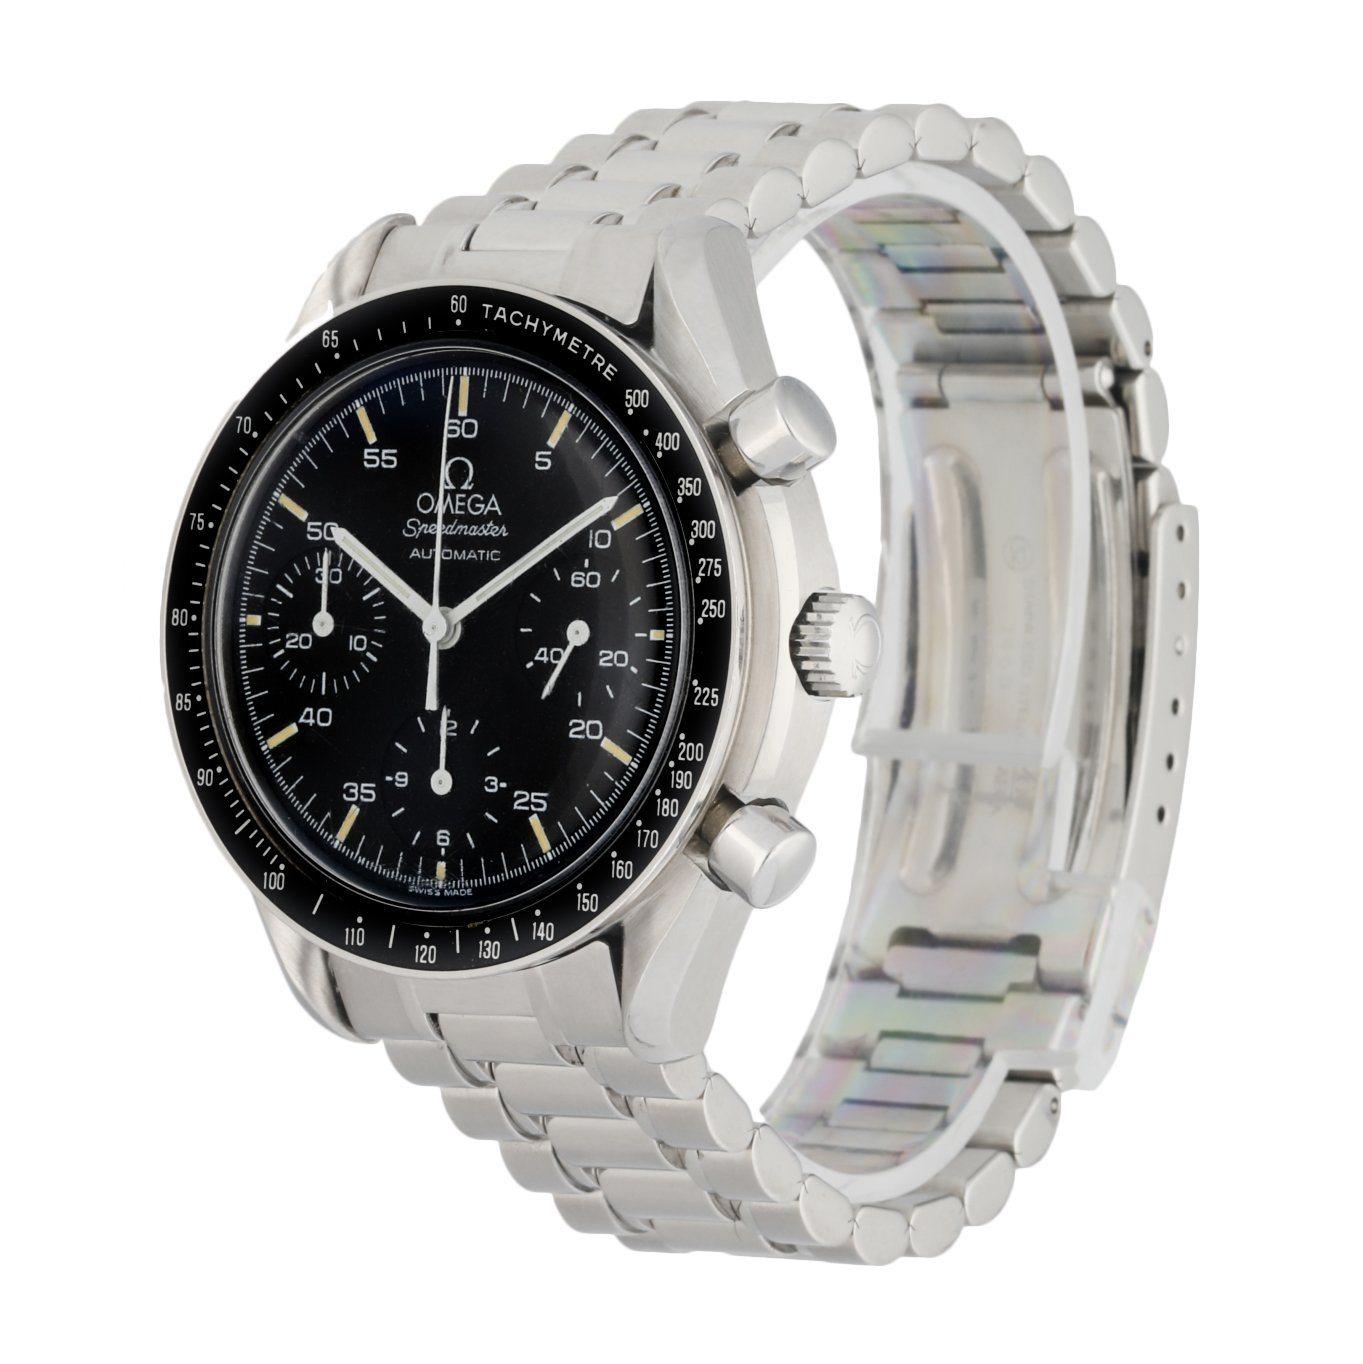 Omega Speedmaster Reduced 3510.50.00 Men's Watch. 39mm Stainless Steel case with a tachymeter bezel. Black dial with luminous hands and index hour markers. Three chronograph subdials with a small seconds subdial, 30 minutes and 12 hours. Stainless